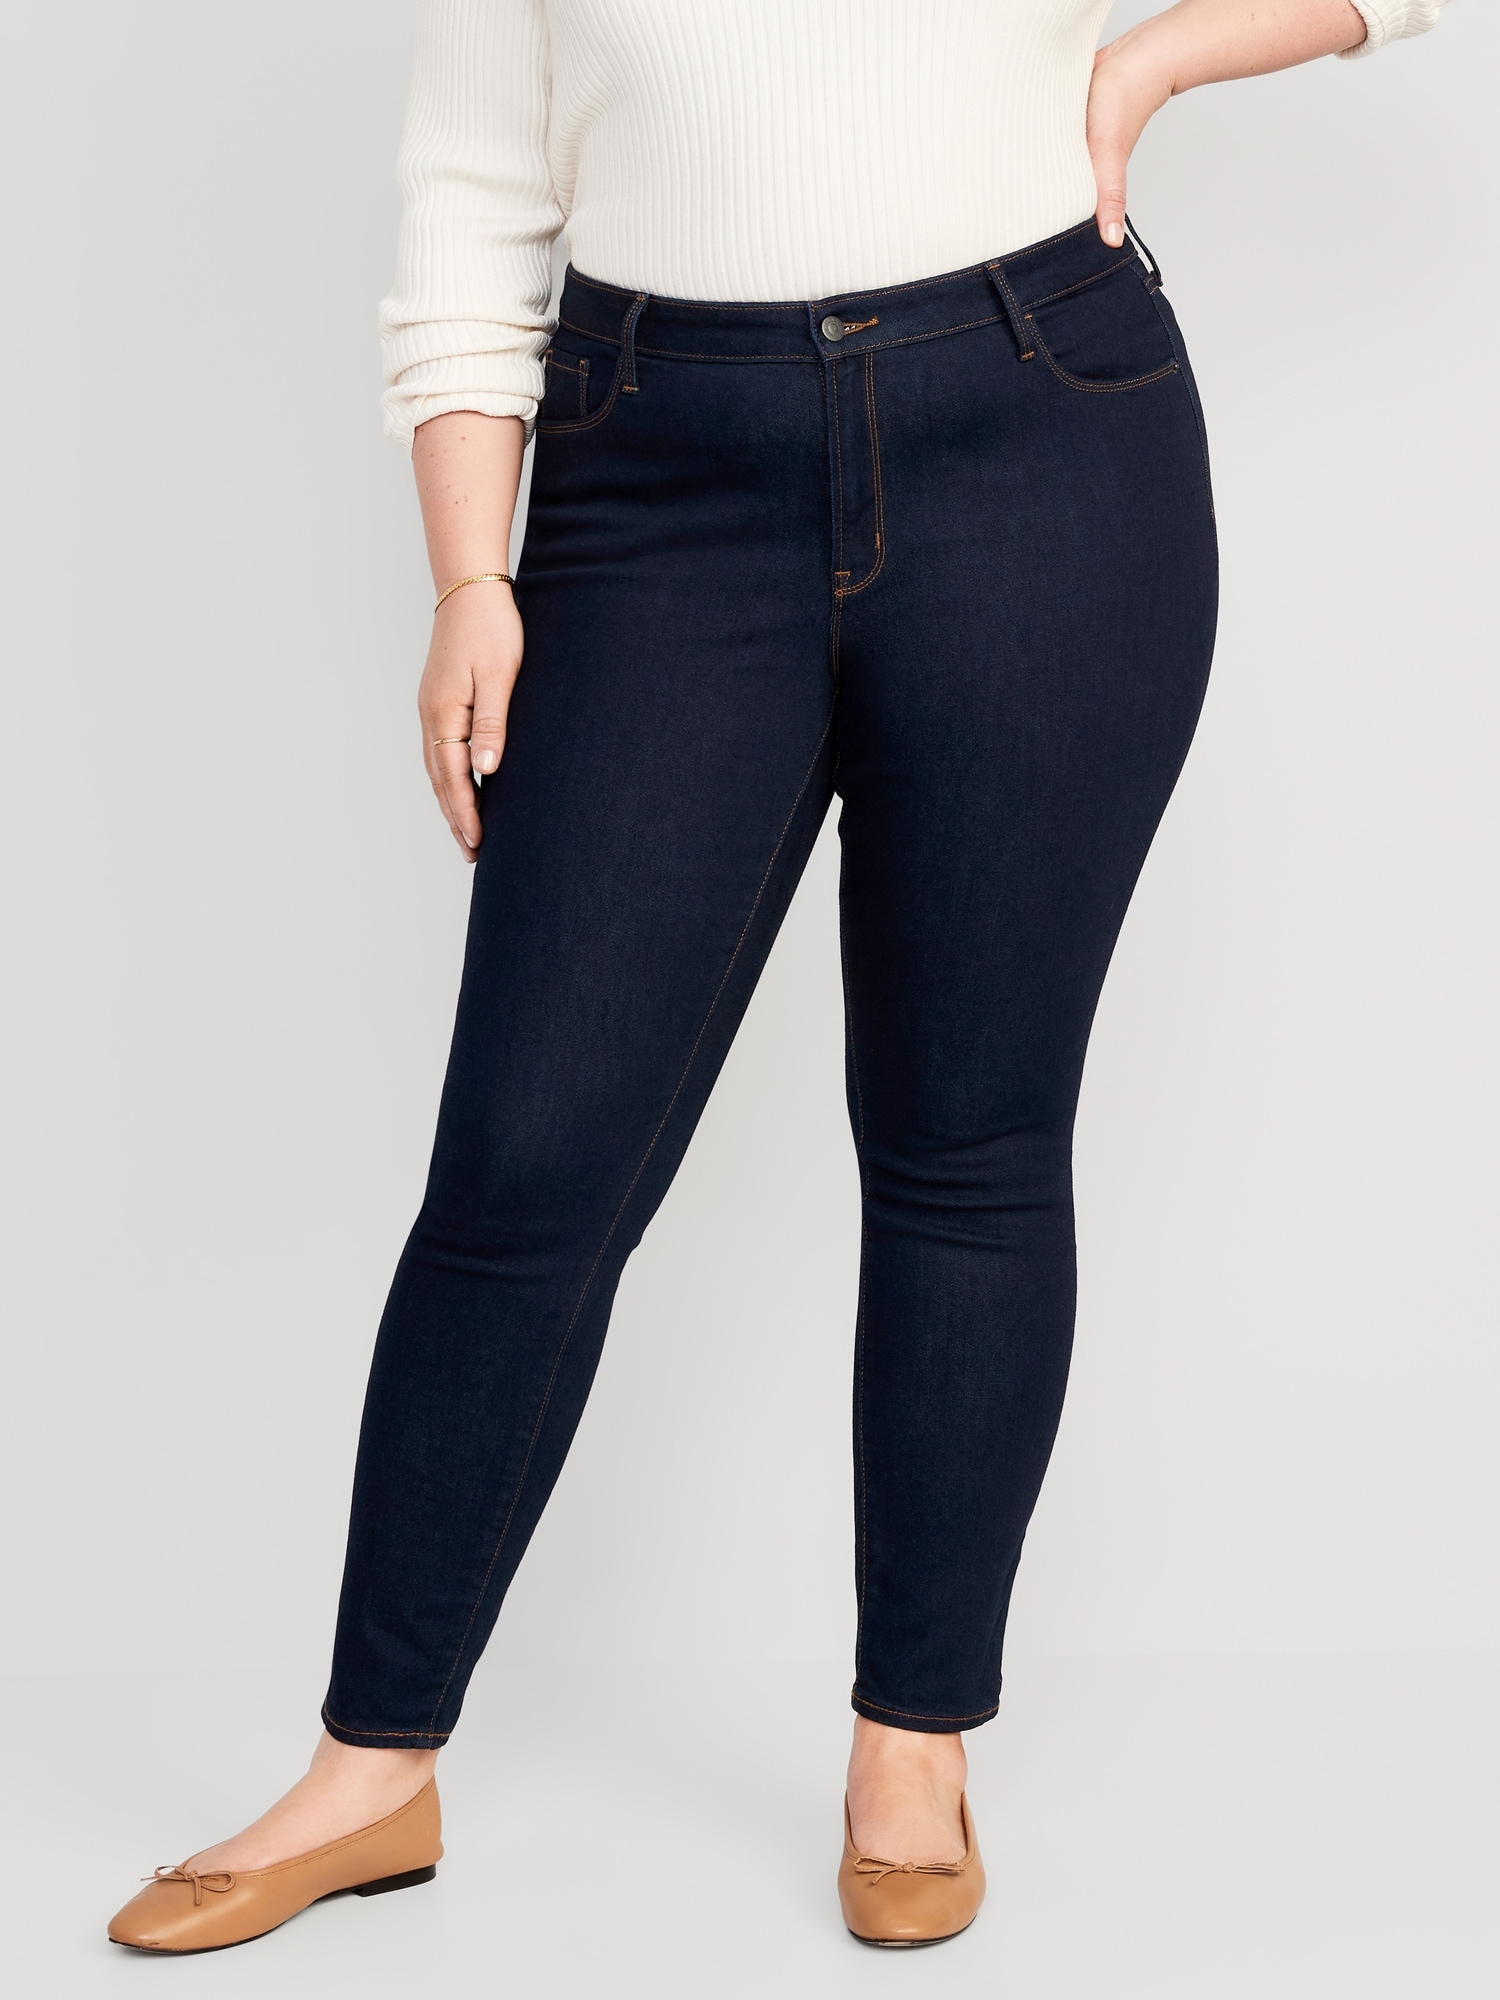 Mid-Rise Pop Icon Skinny Jeans for Women | Old Navy